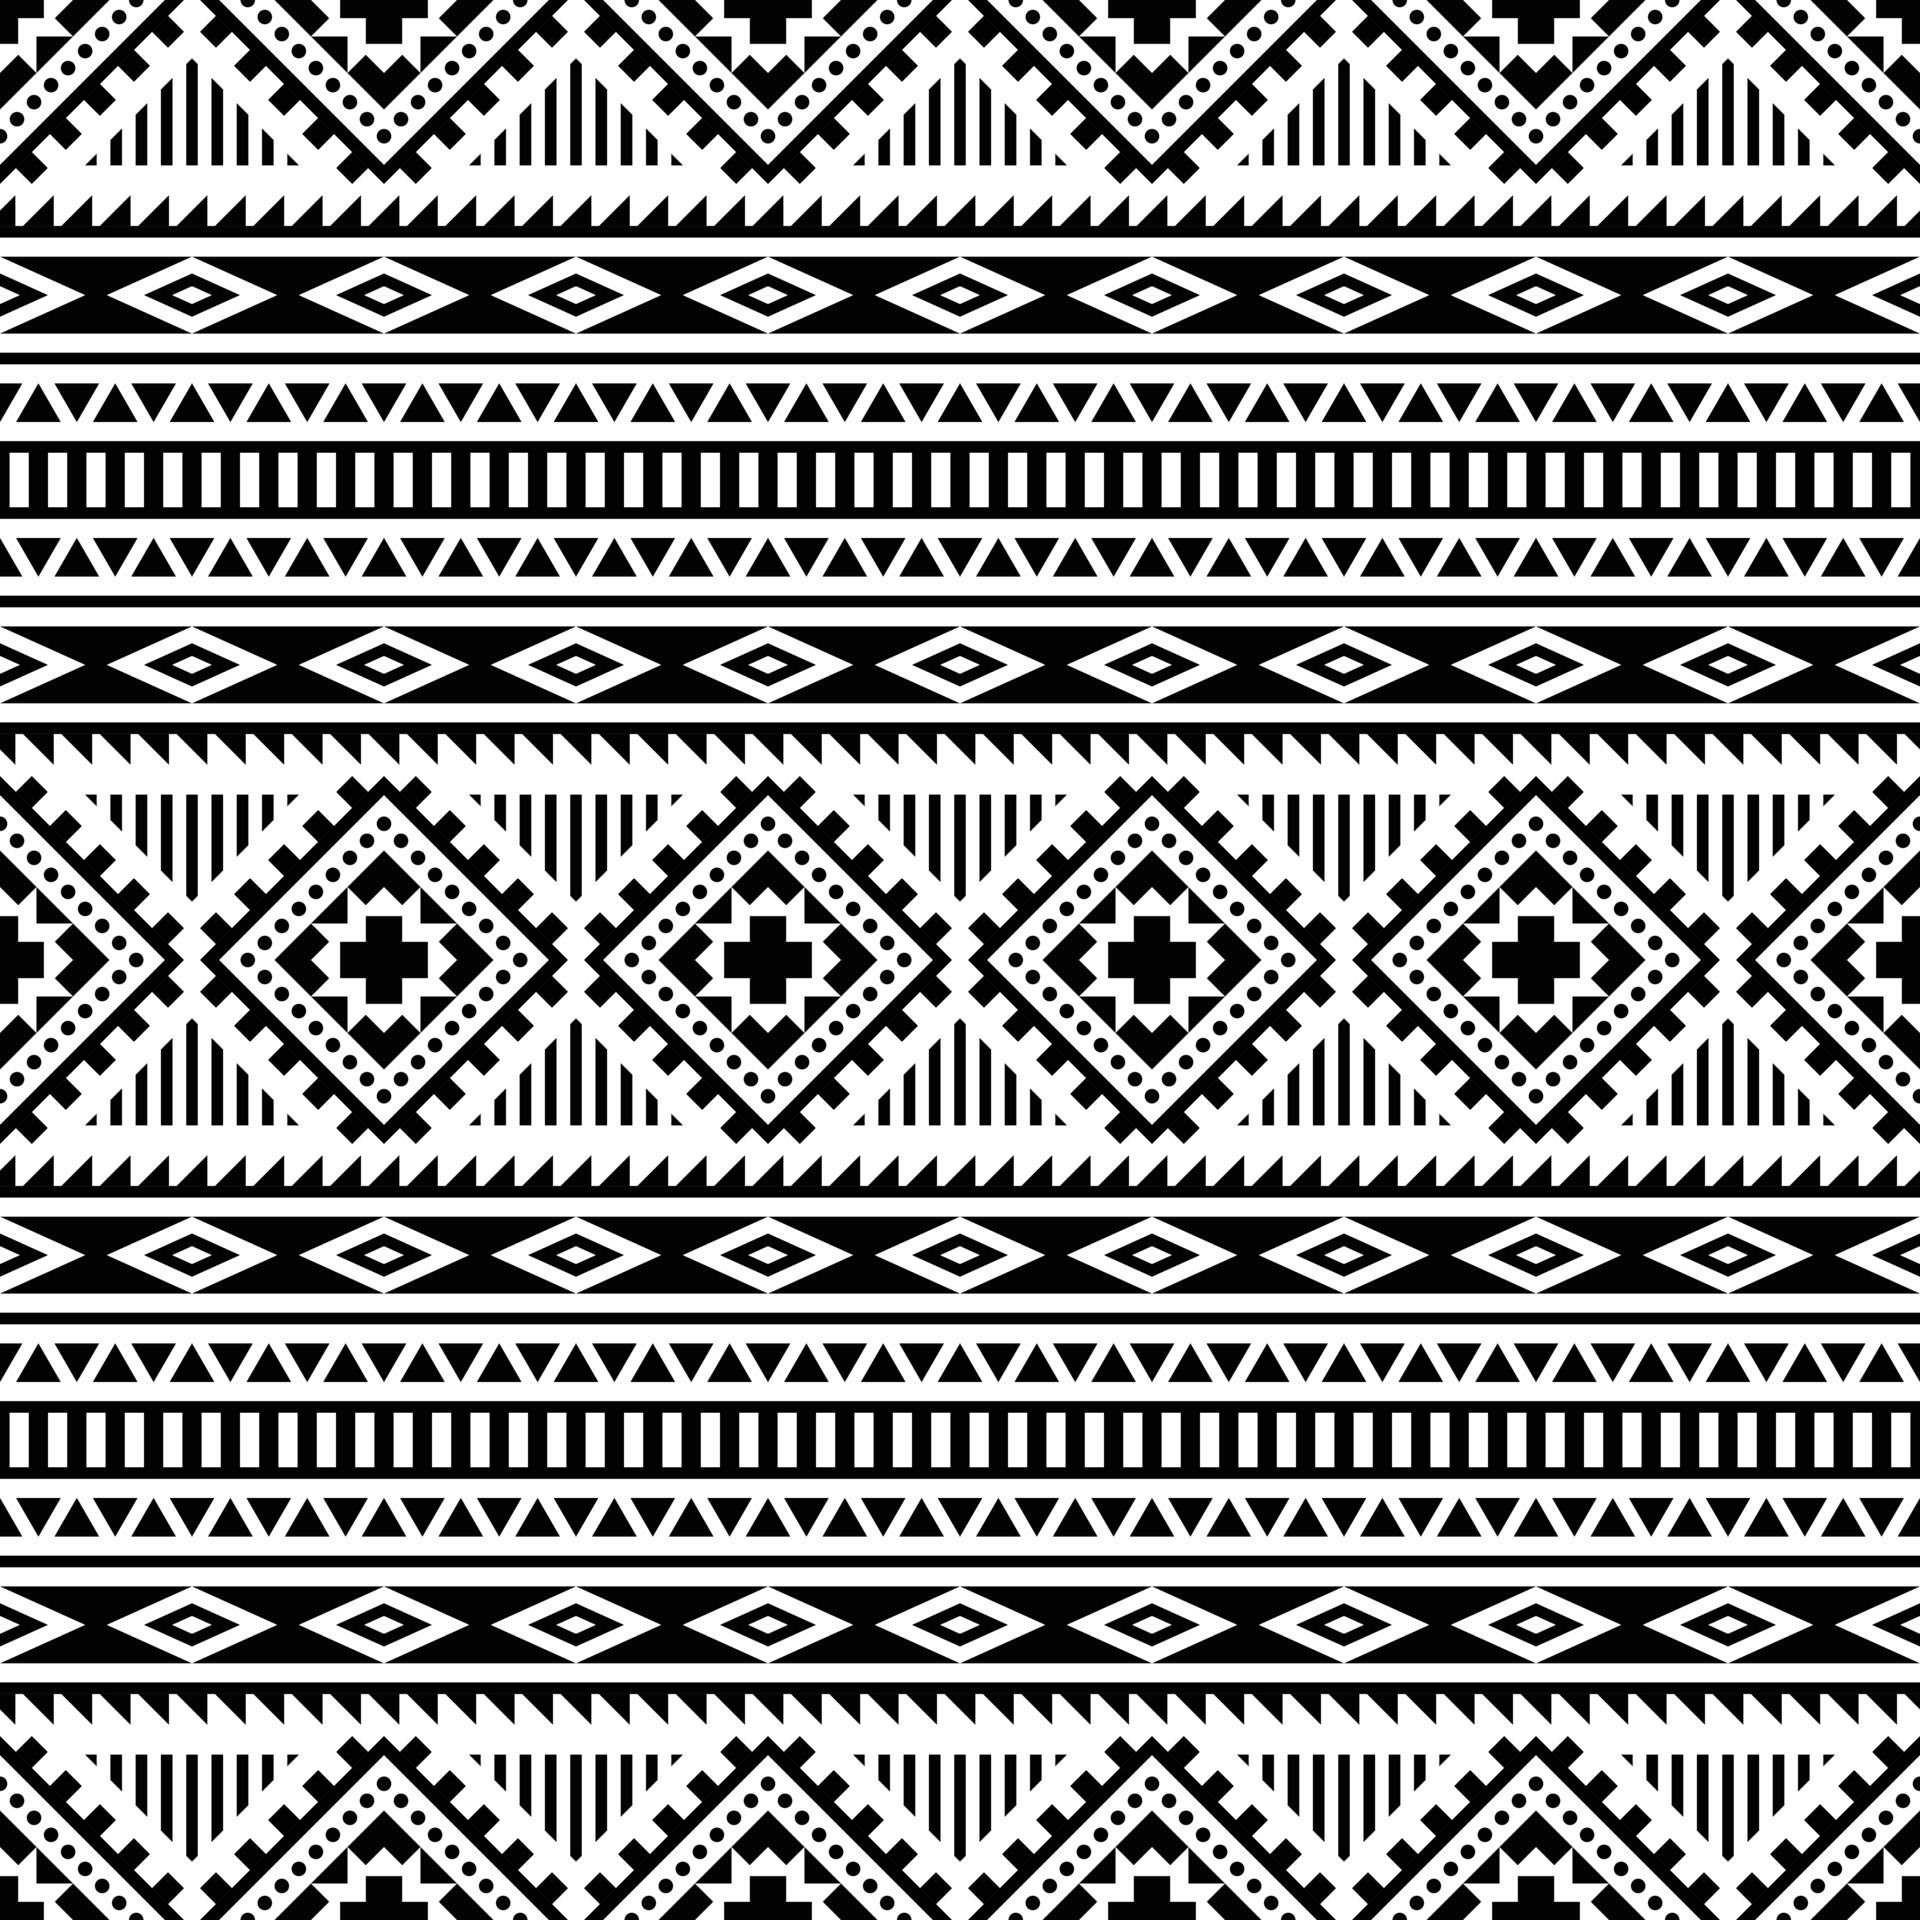 Geometric abstract shapes with ethnic style. Seamless tribal pattern ...